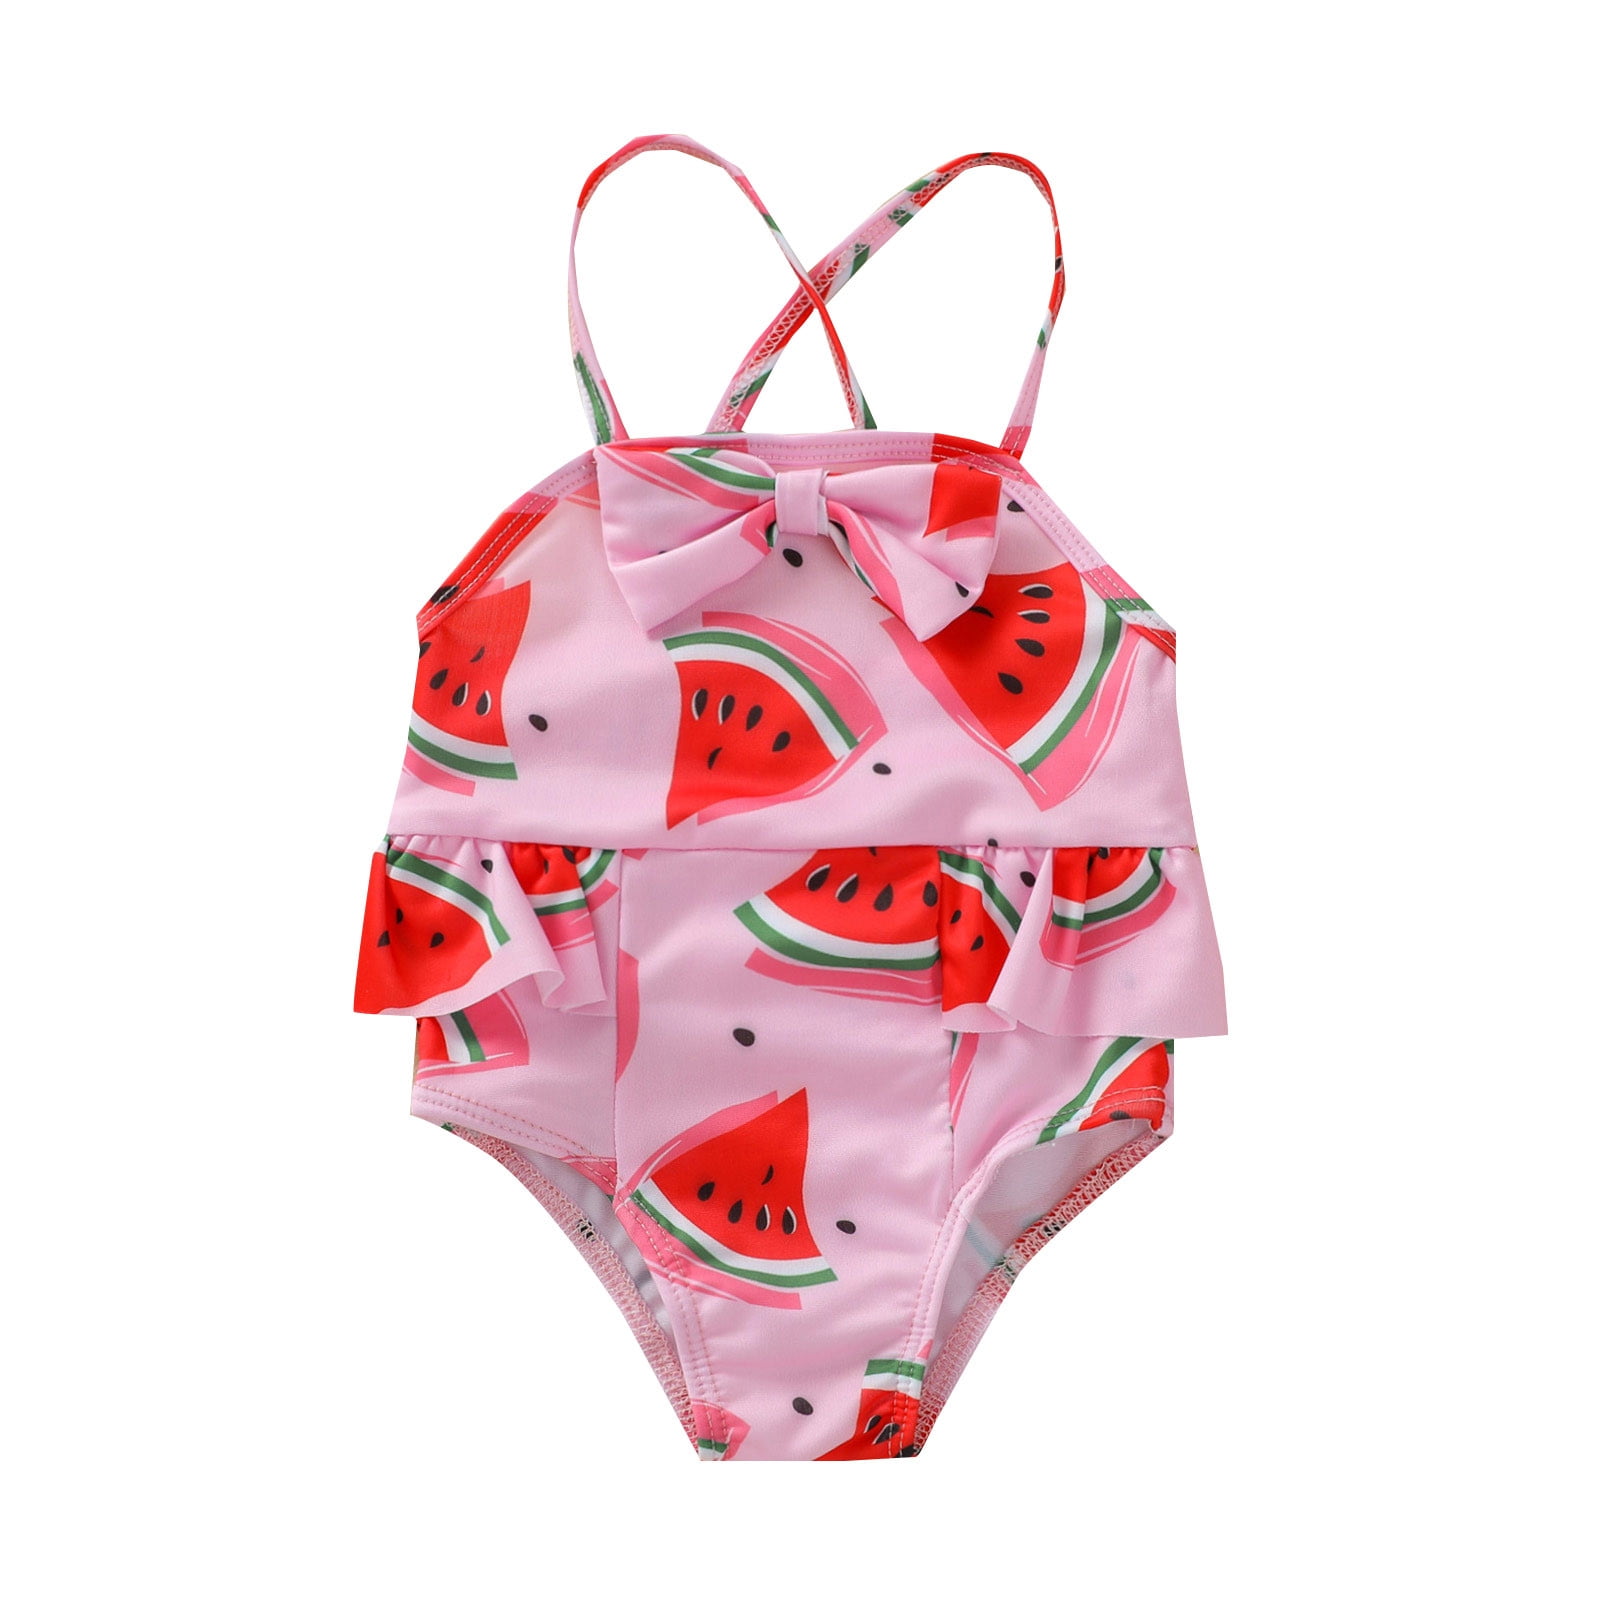 kpoplk Baby Swimsuit Girl Girl's One Piece Swimsuit Ditsy Floral Tie ...